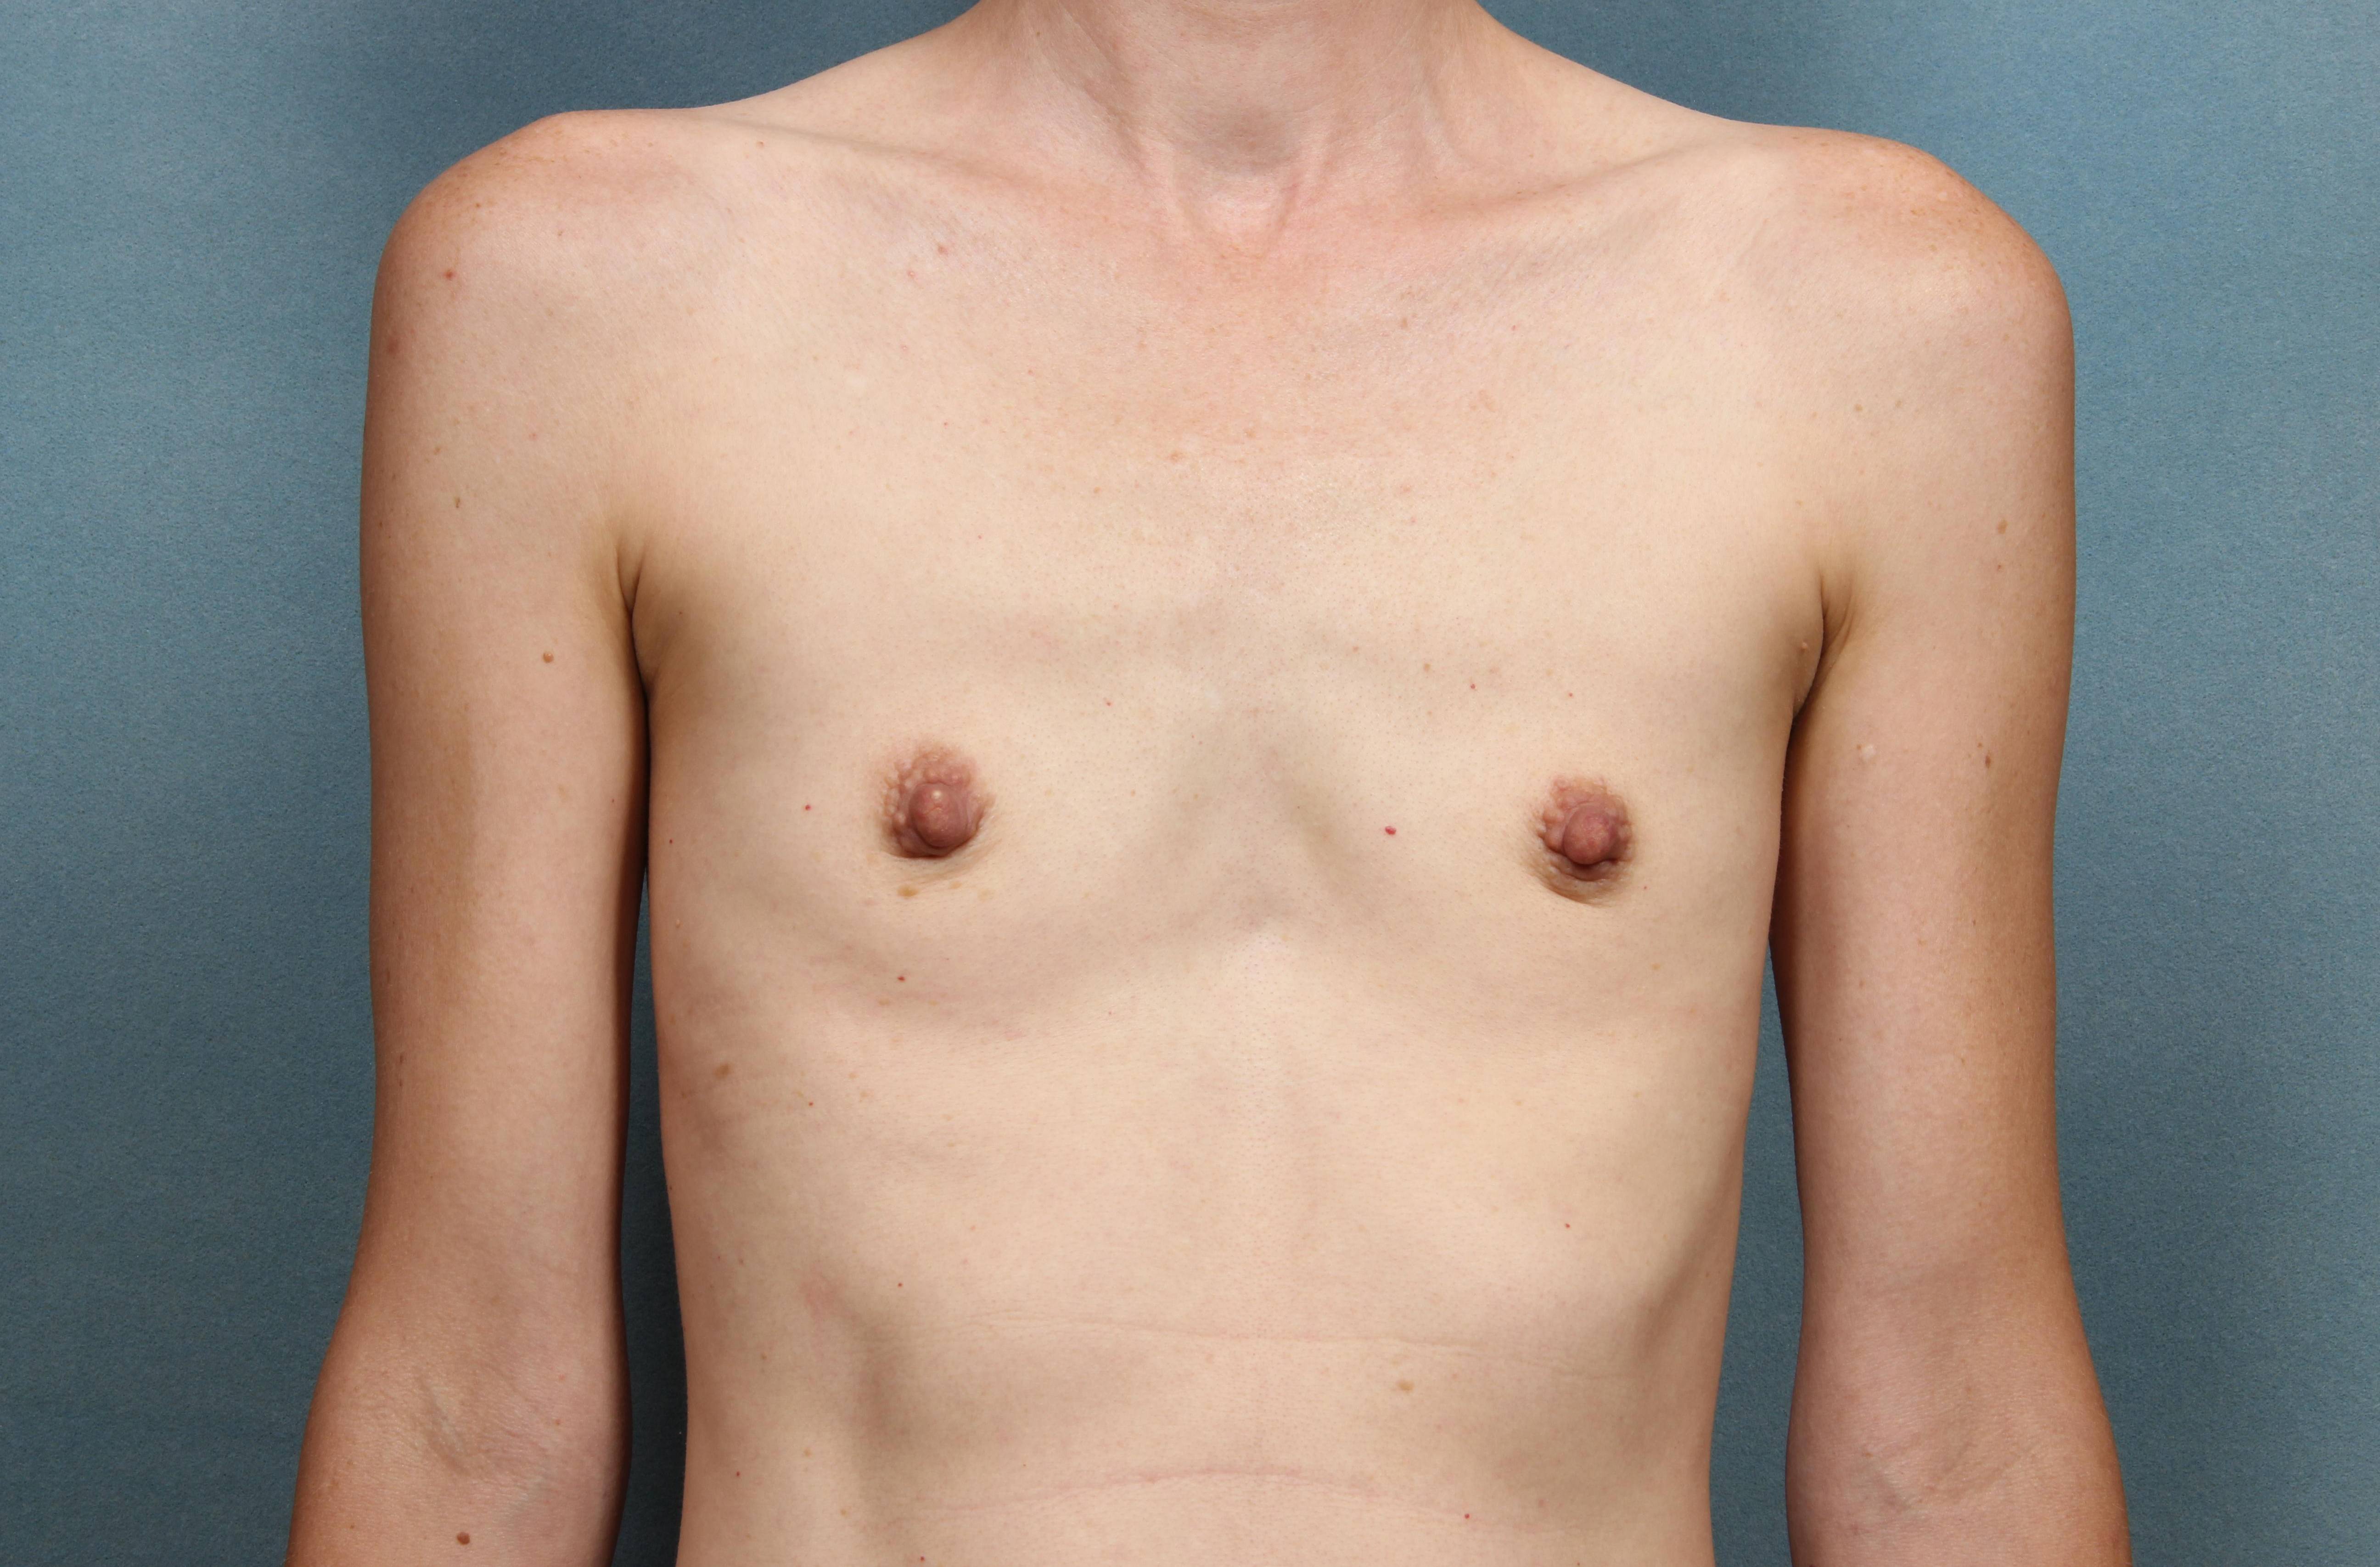 Breast Augmentation Case 28 Before